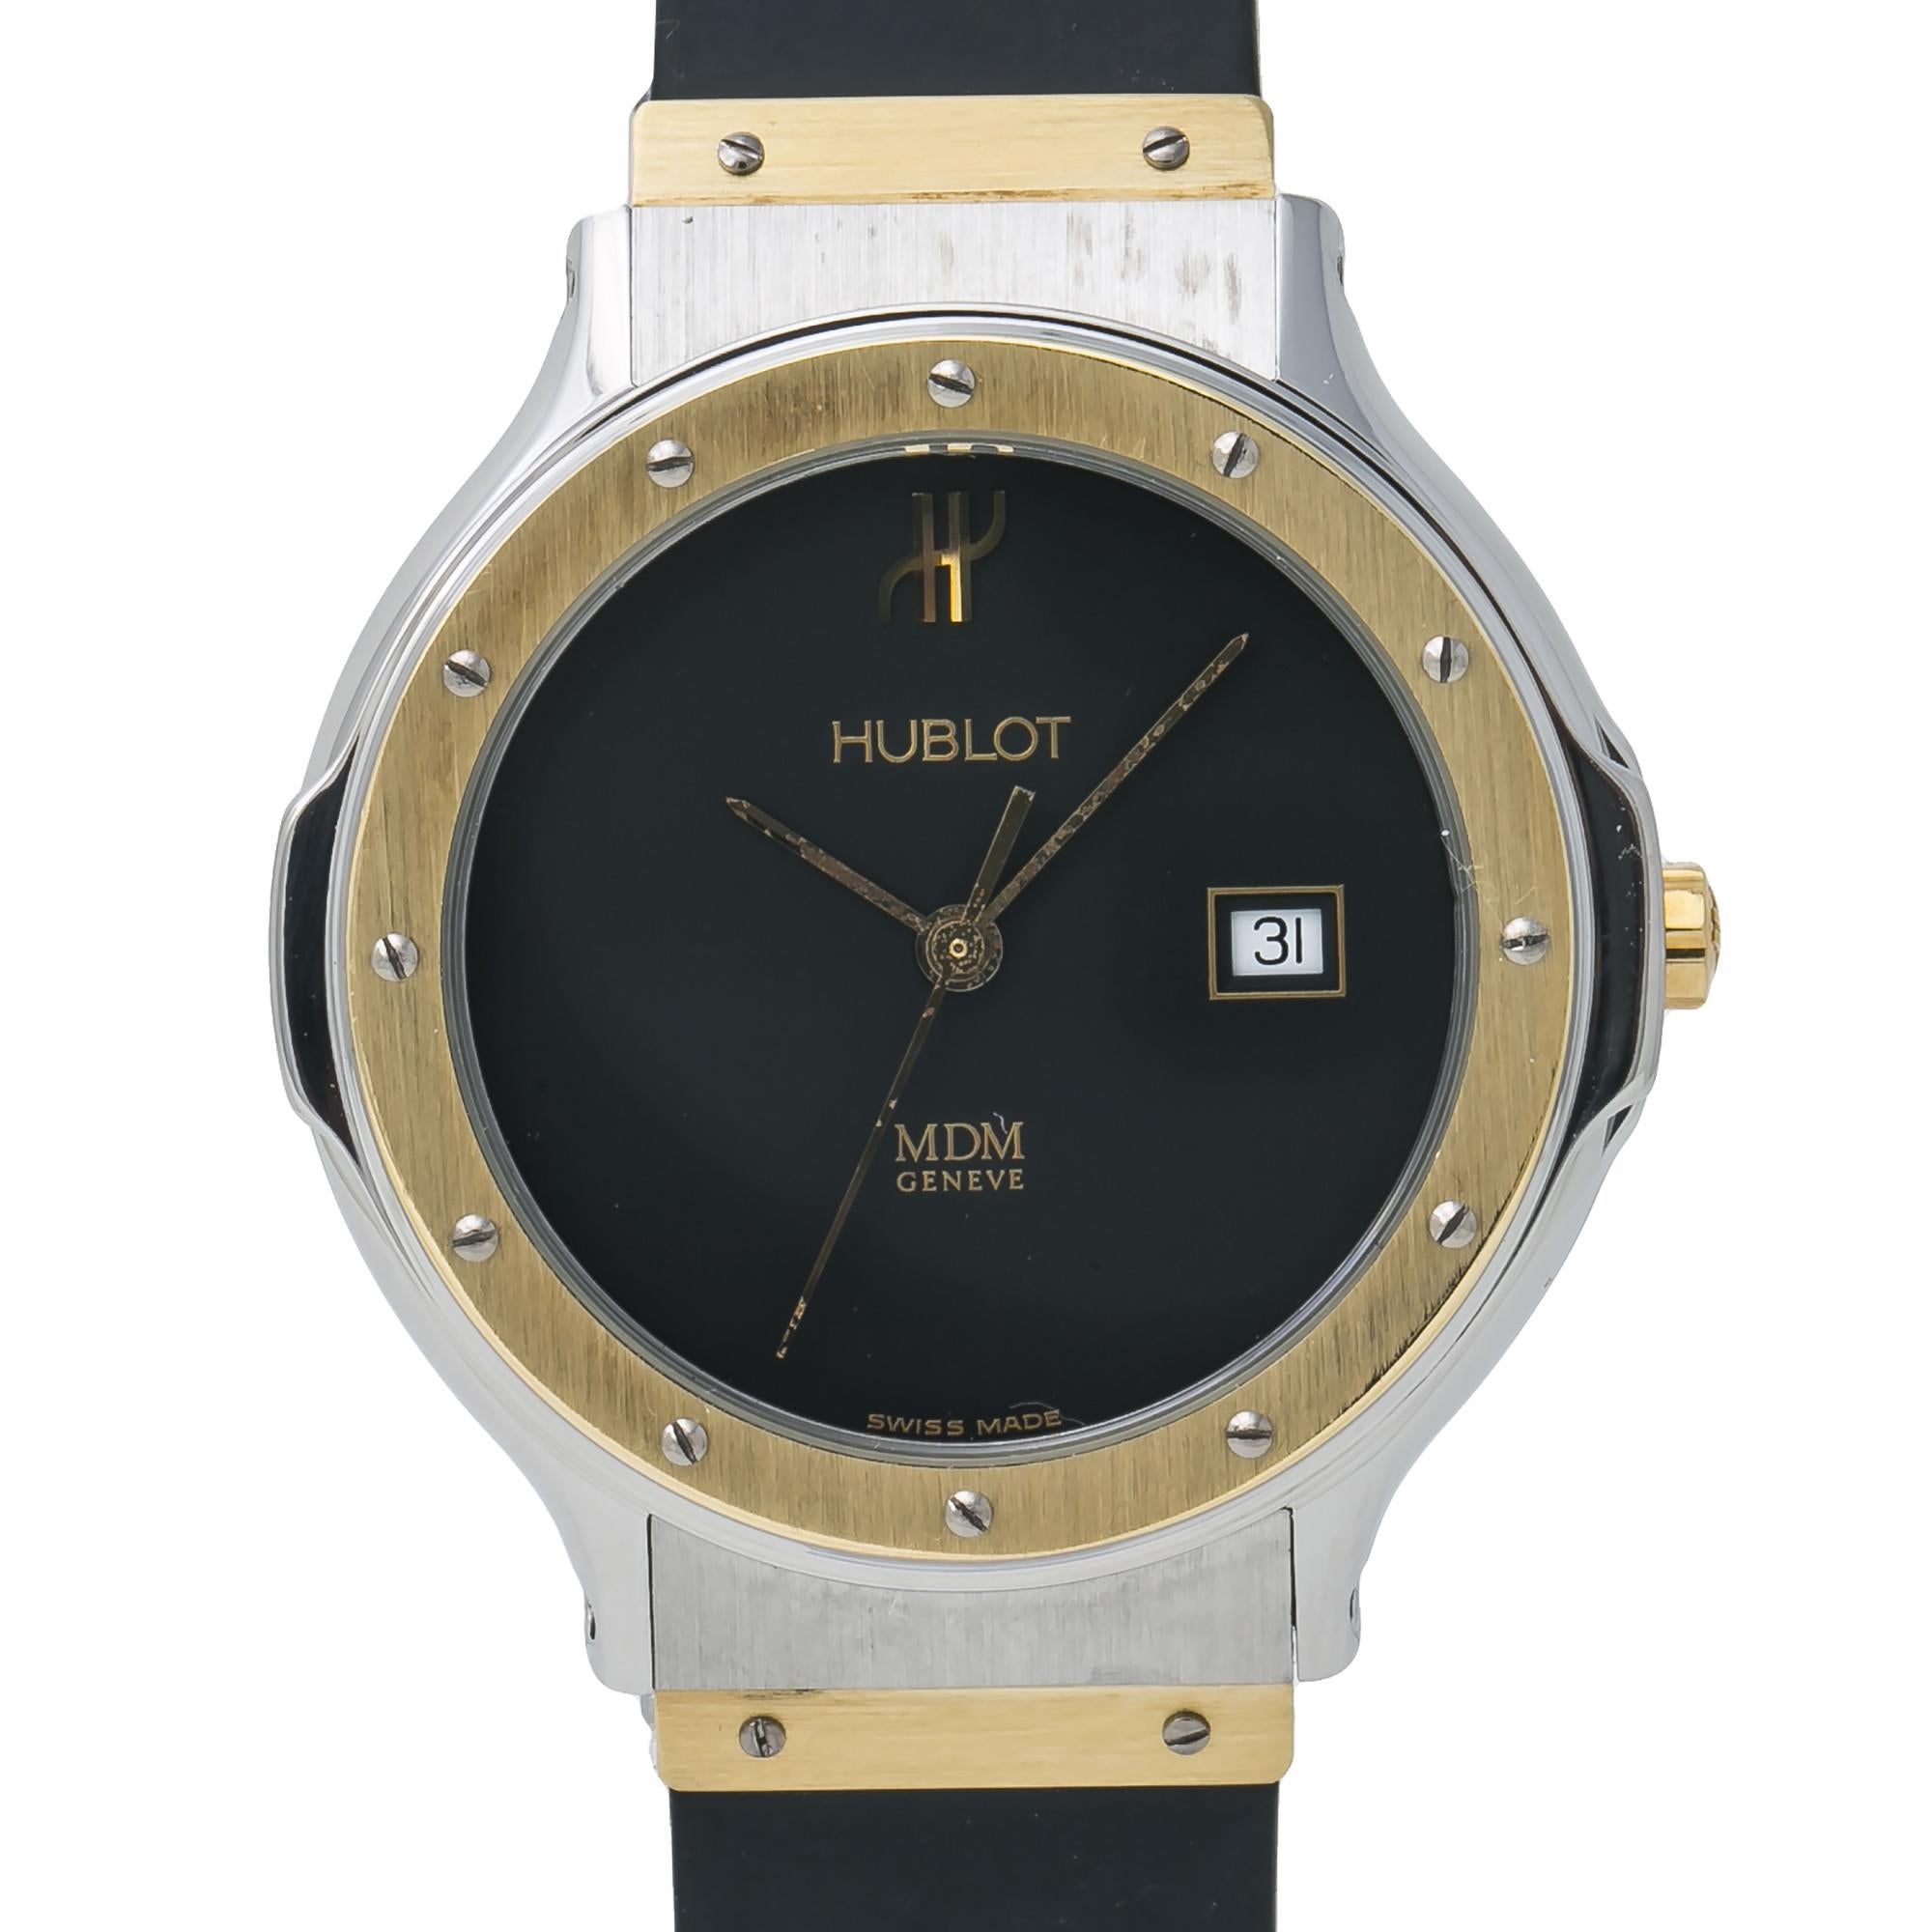 Contemporary Hublot MDM 1401.2, Black Dial, Certified and Warranty